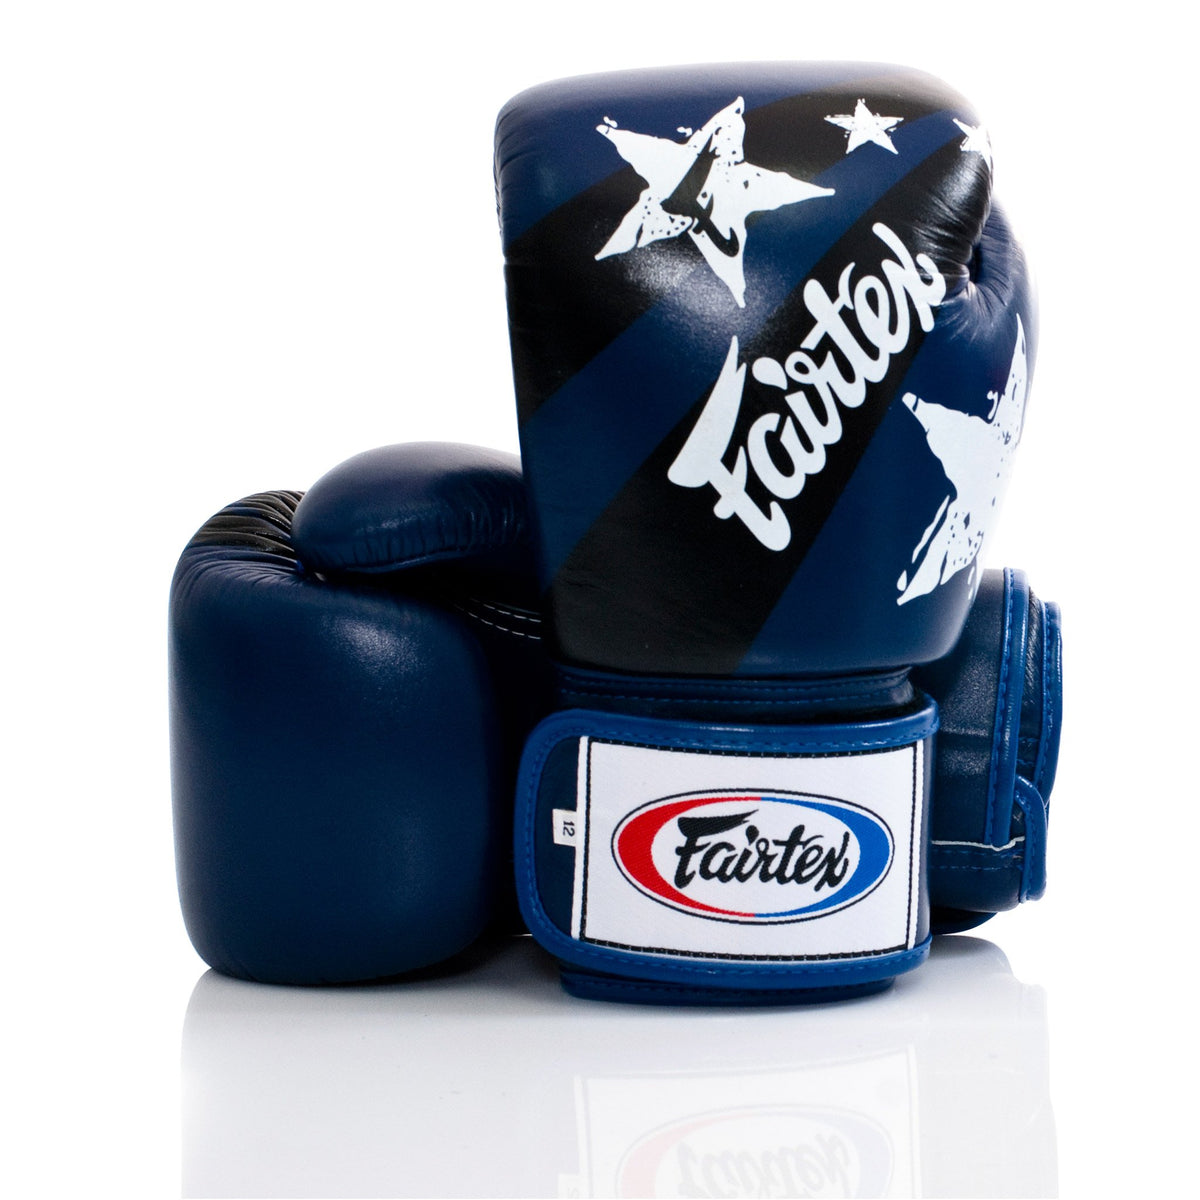 Fairtex- Universal Gloves "Tight-Fit" Design-Nation Prints Collection